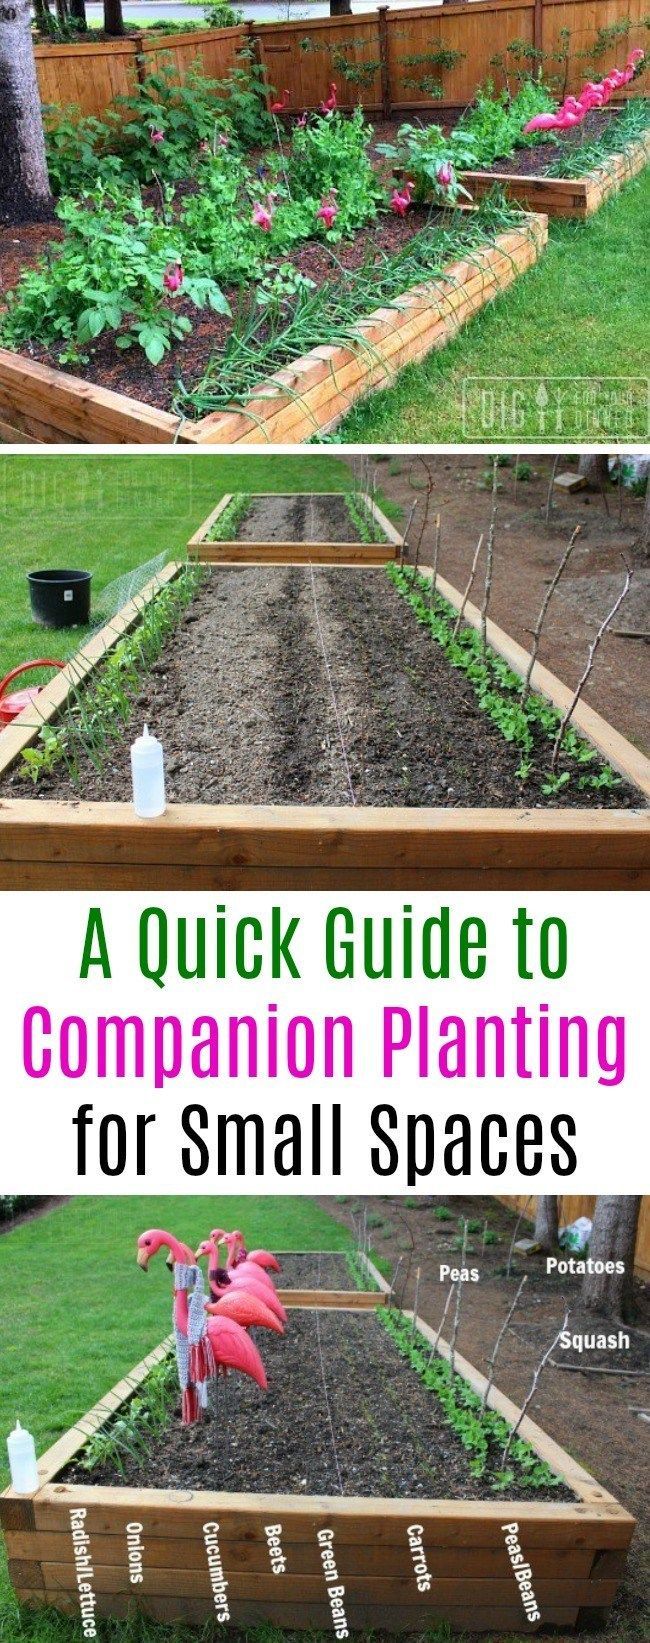 A Quick Guide to Companion Planting - One Hundred Dollars a Month -   16 planting Garden thoughts ideas